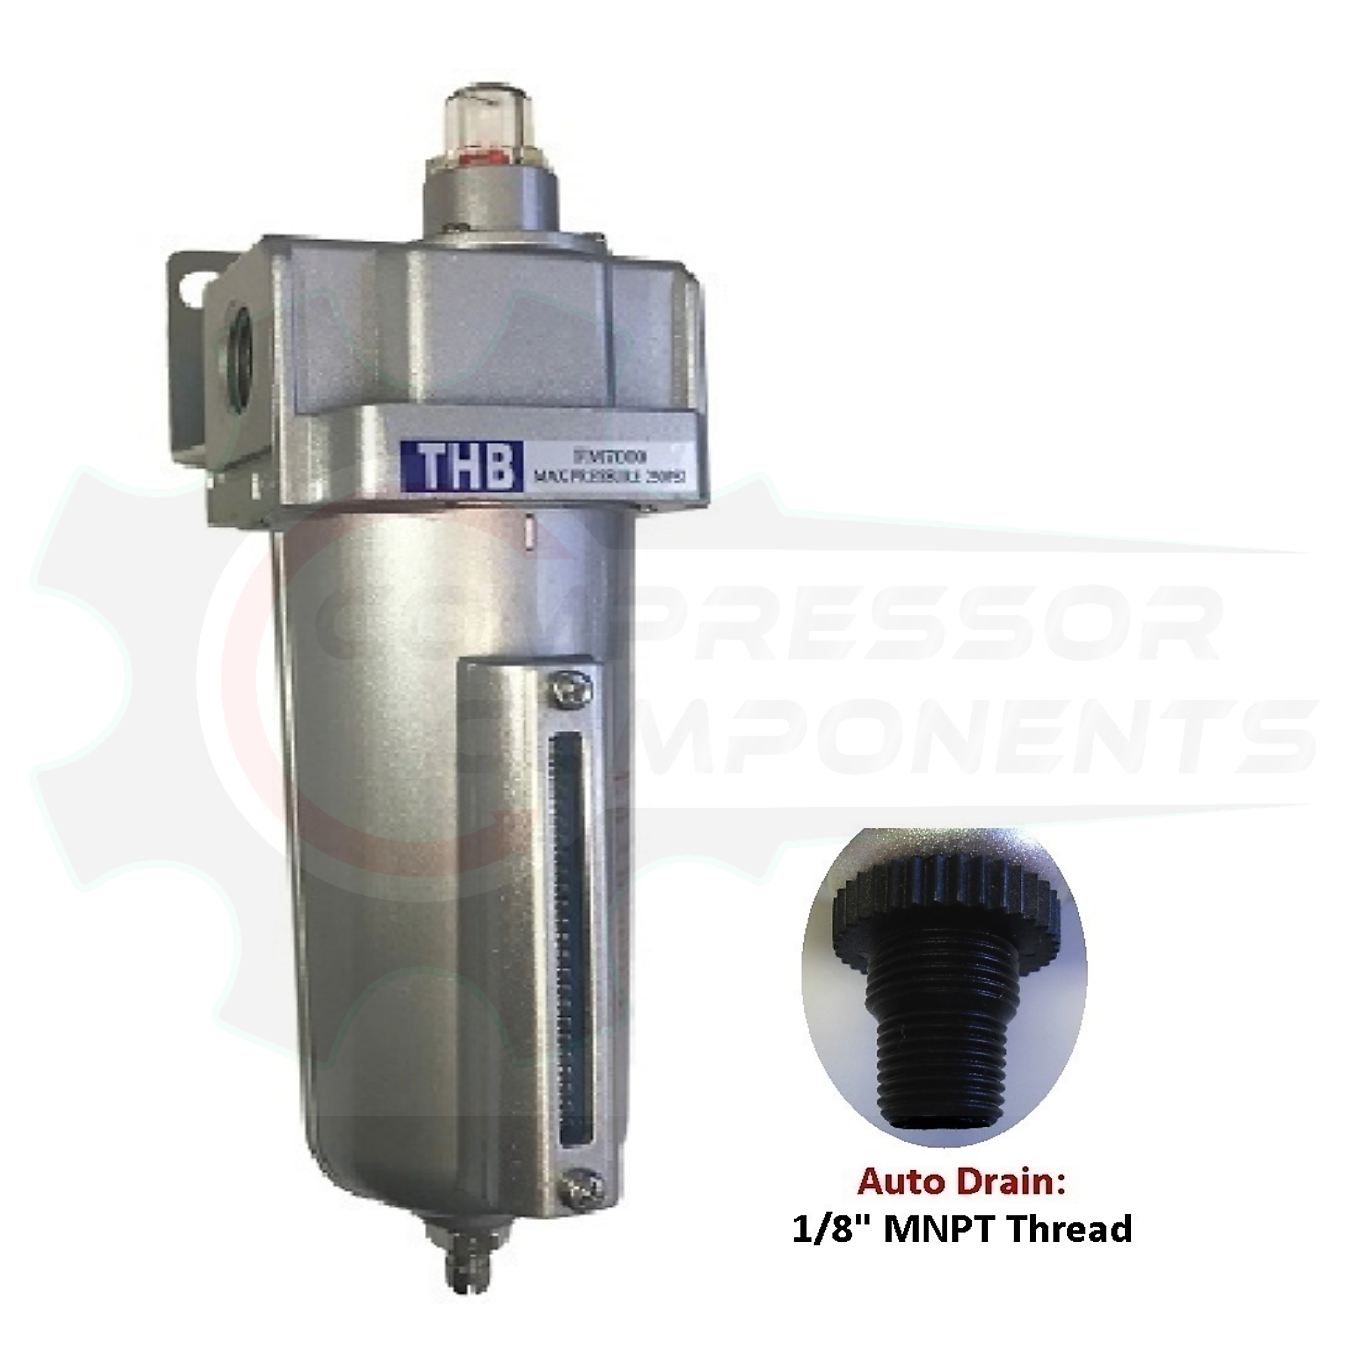 THB FM764A COALESCING FILTER - 1/2" FNPT INDUSTRIAL GRADE WITH 0.01 MICRON 140 CFM FILTER WITH AUTO DRAIN